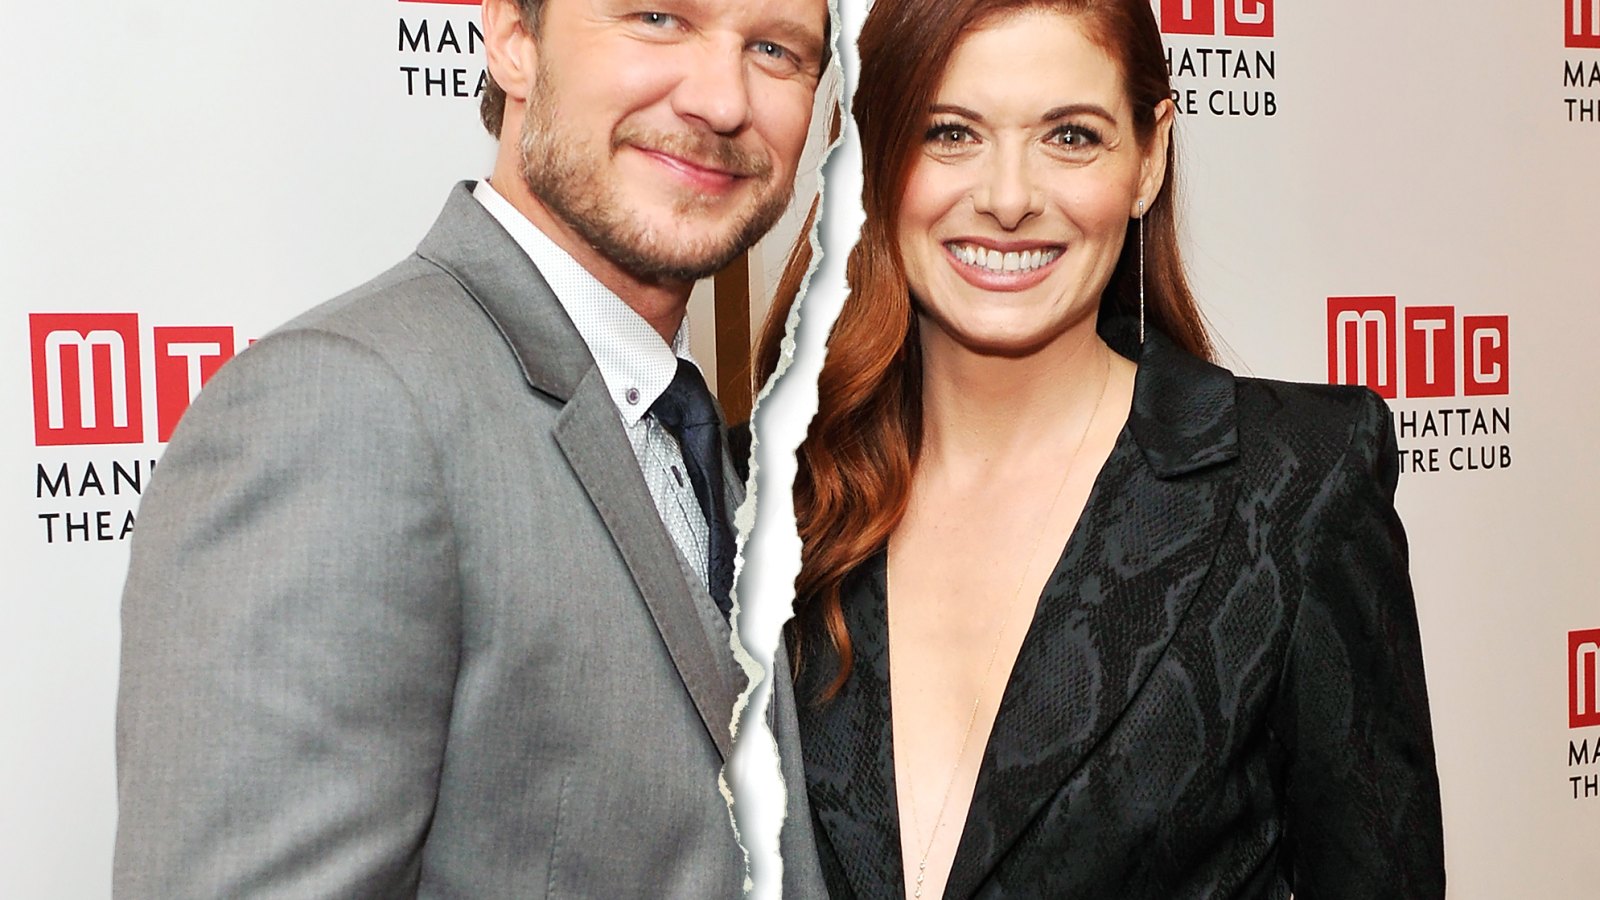 Will Chase and Debra Messing